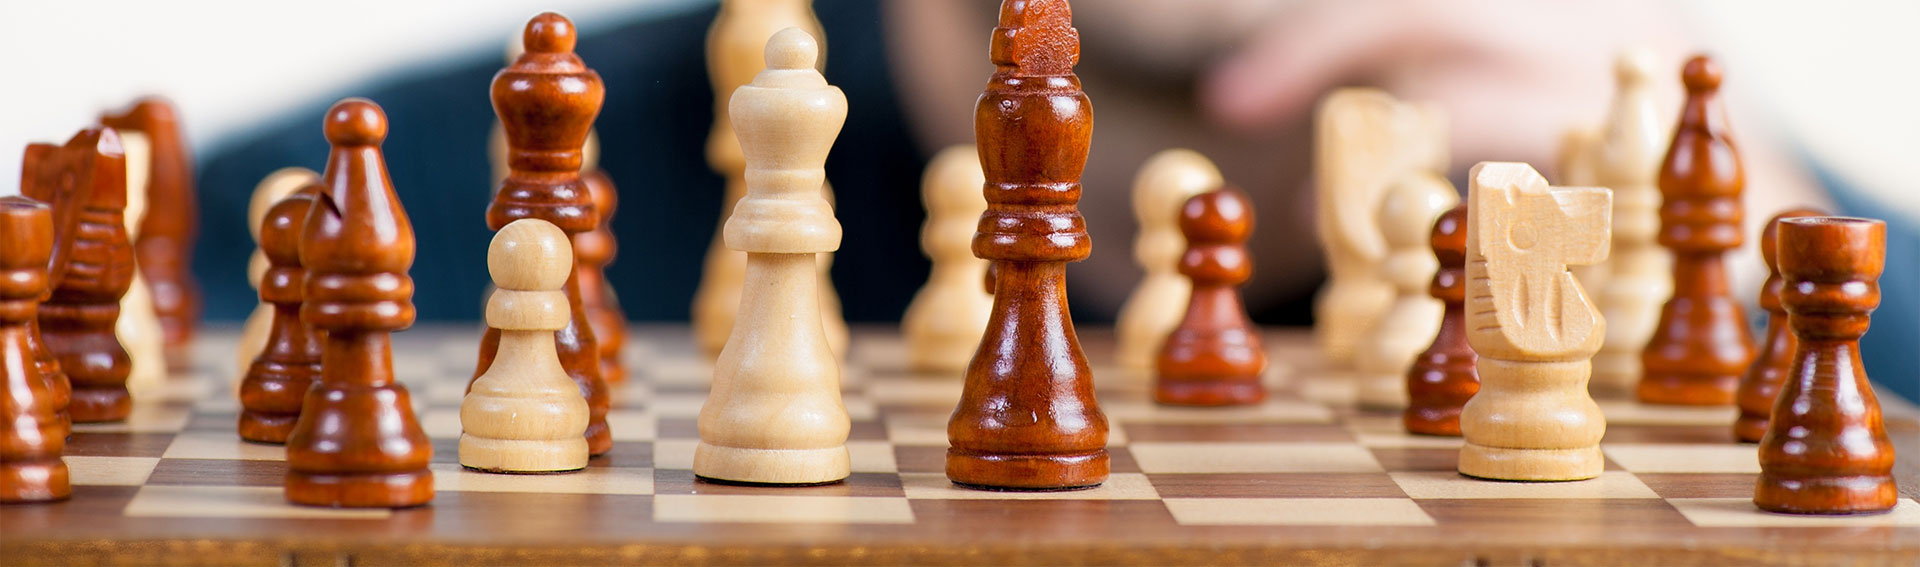 The Art of Strategic Thinking and Acting